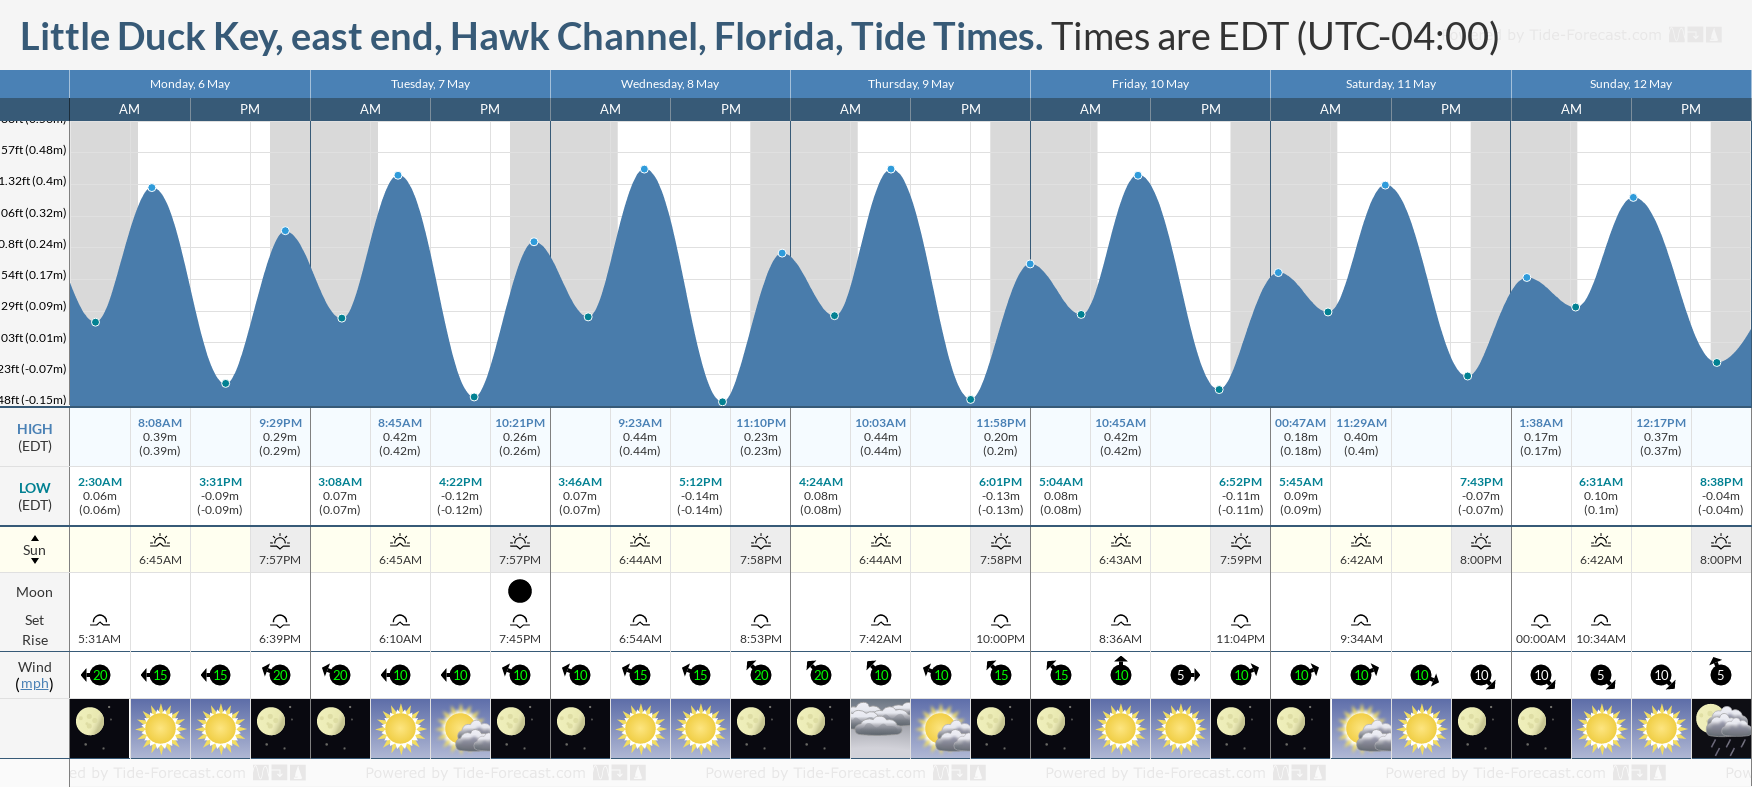 Little Duck Key, east end, Hawk Channel, Florida Tide Chart including high and low tide tide times for the next 7 days